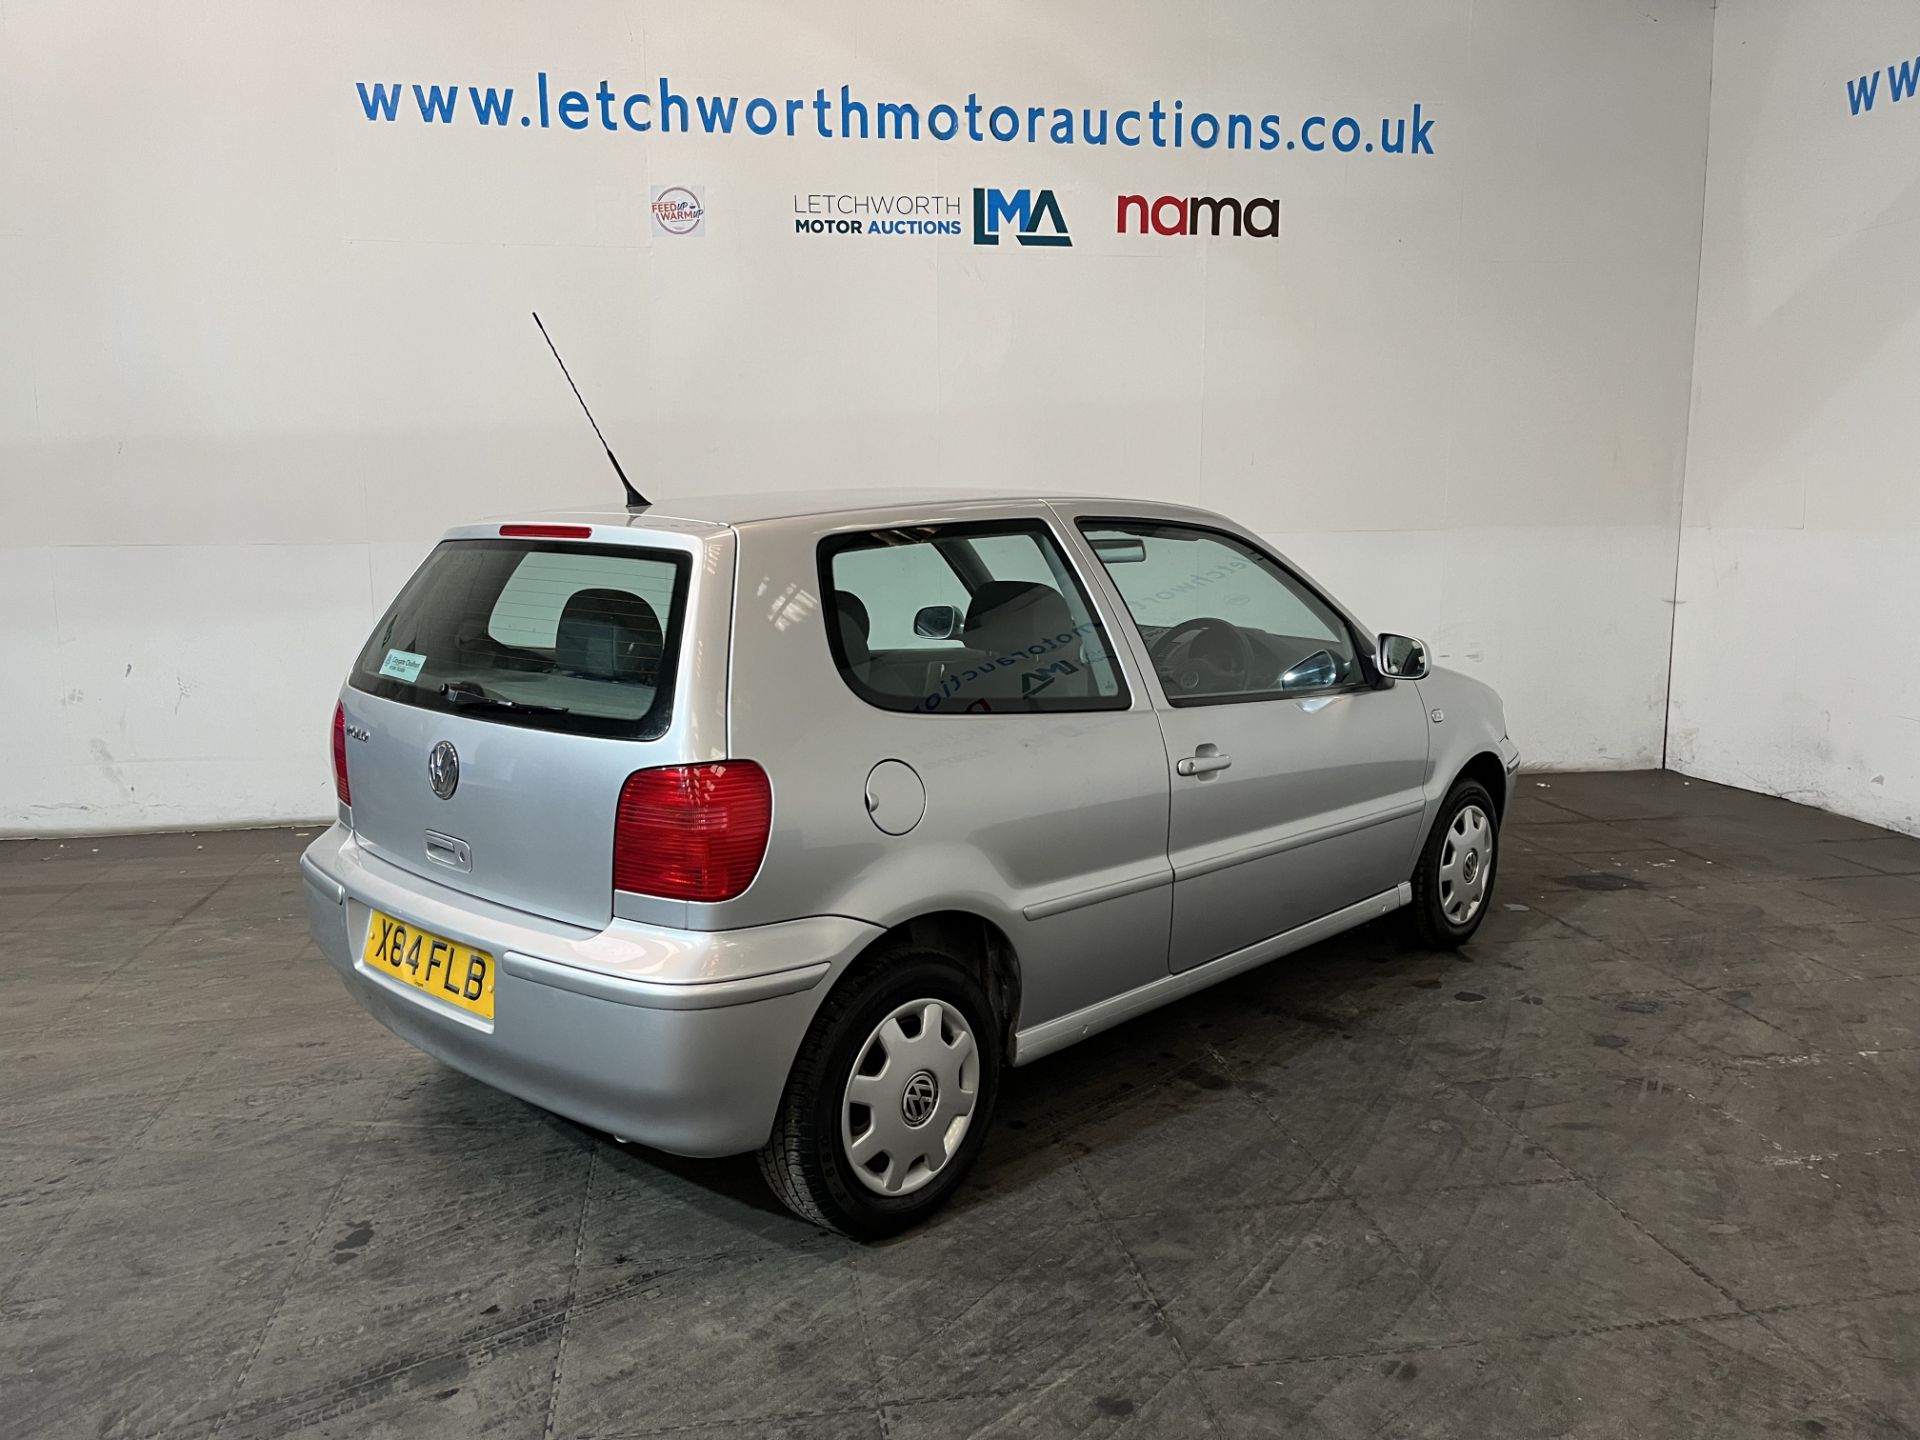 2000 Volkswagen Polo S - 1390cc - Image 6 of 16